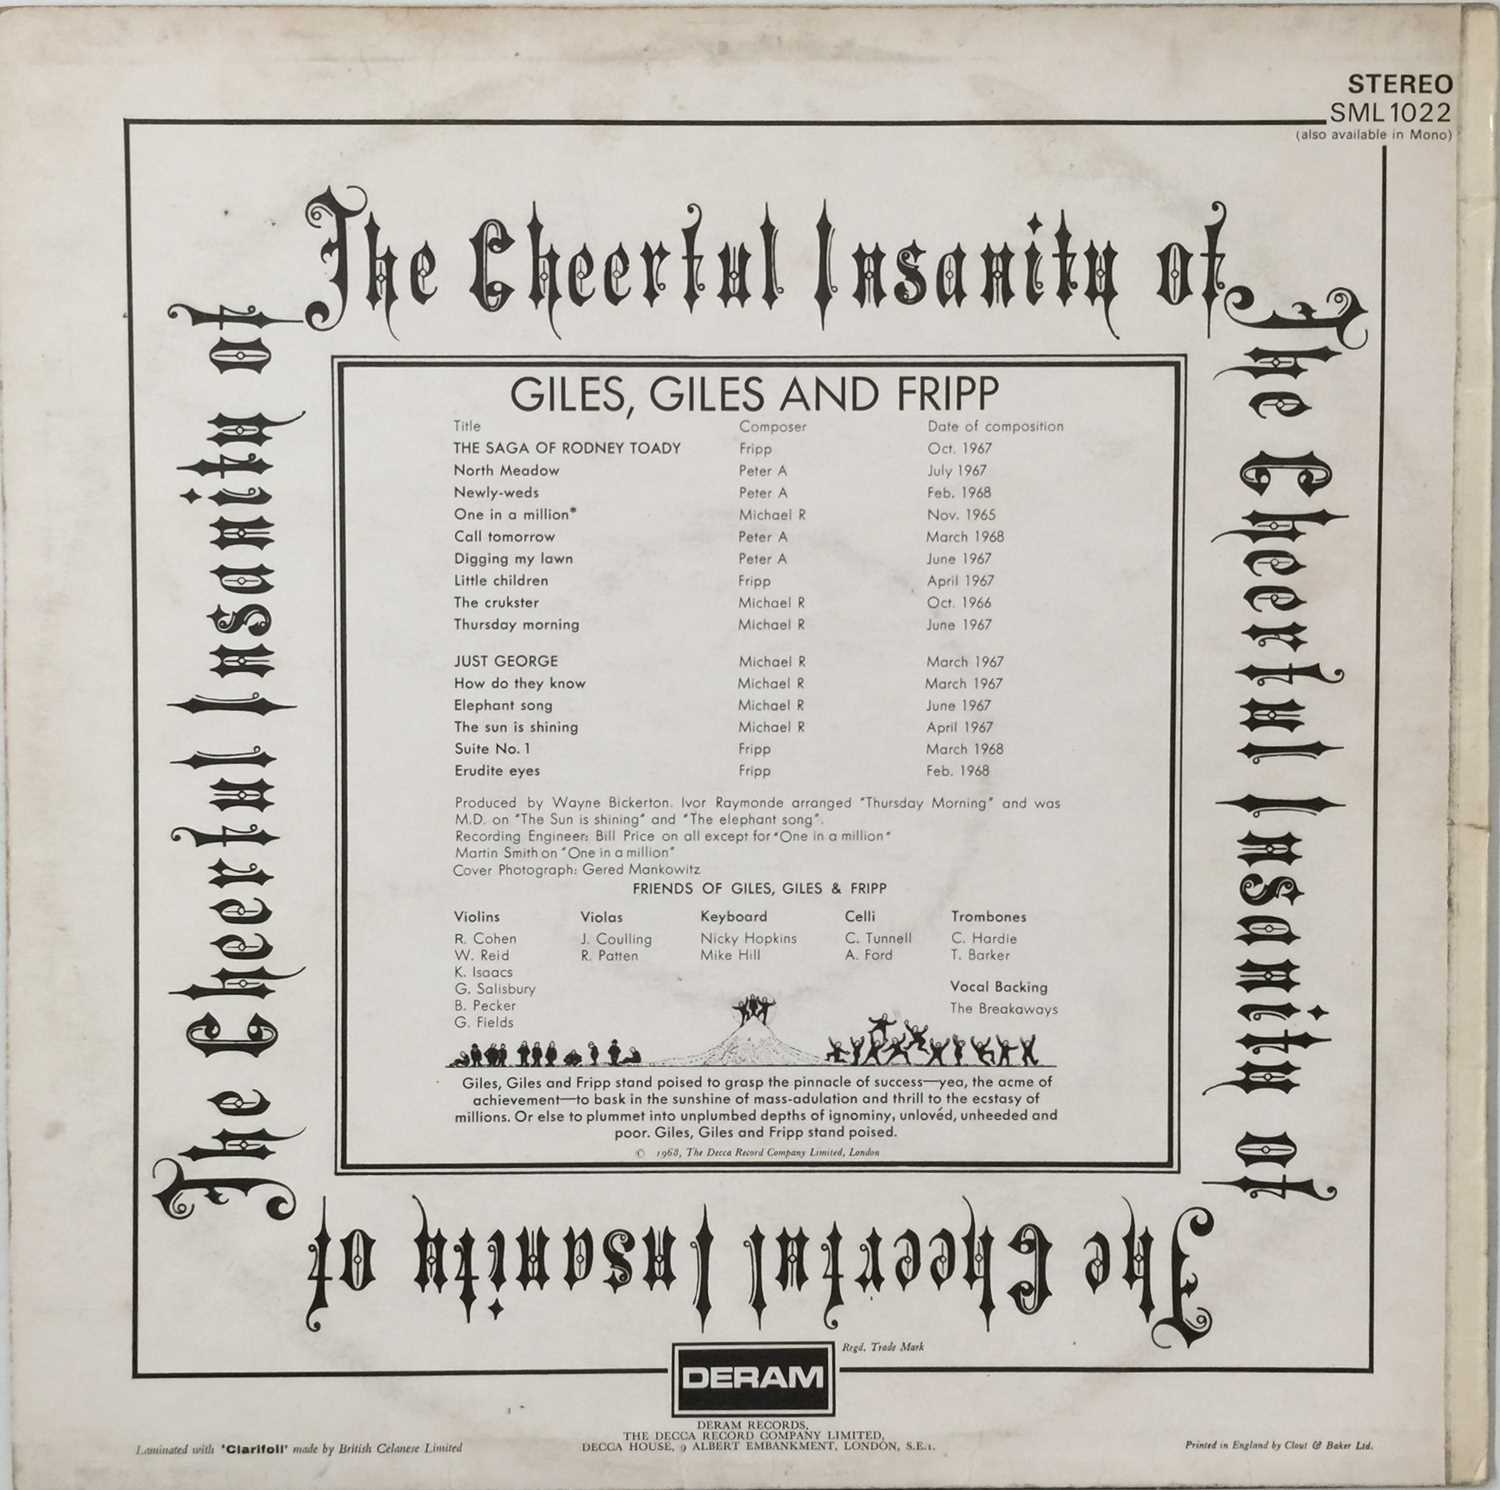 GILES, GILES AND FRIPP - THE CHEERFUL INSANITY OF LP (UK STEREO - DERAM - SML 1022) - Image 3 of 5